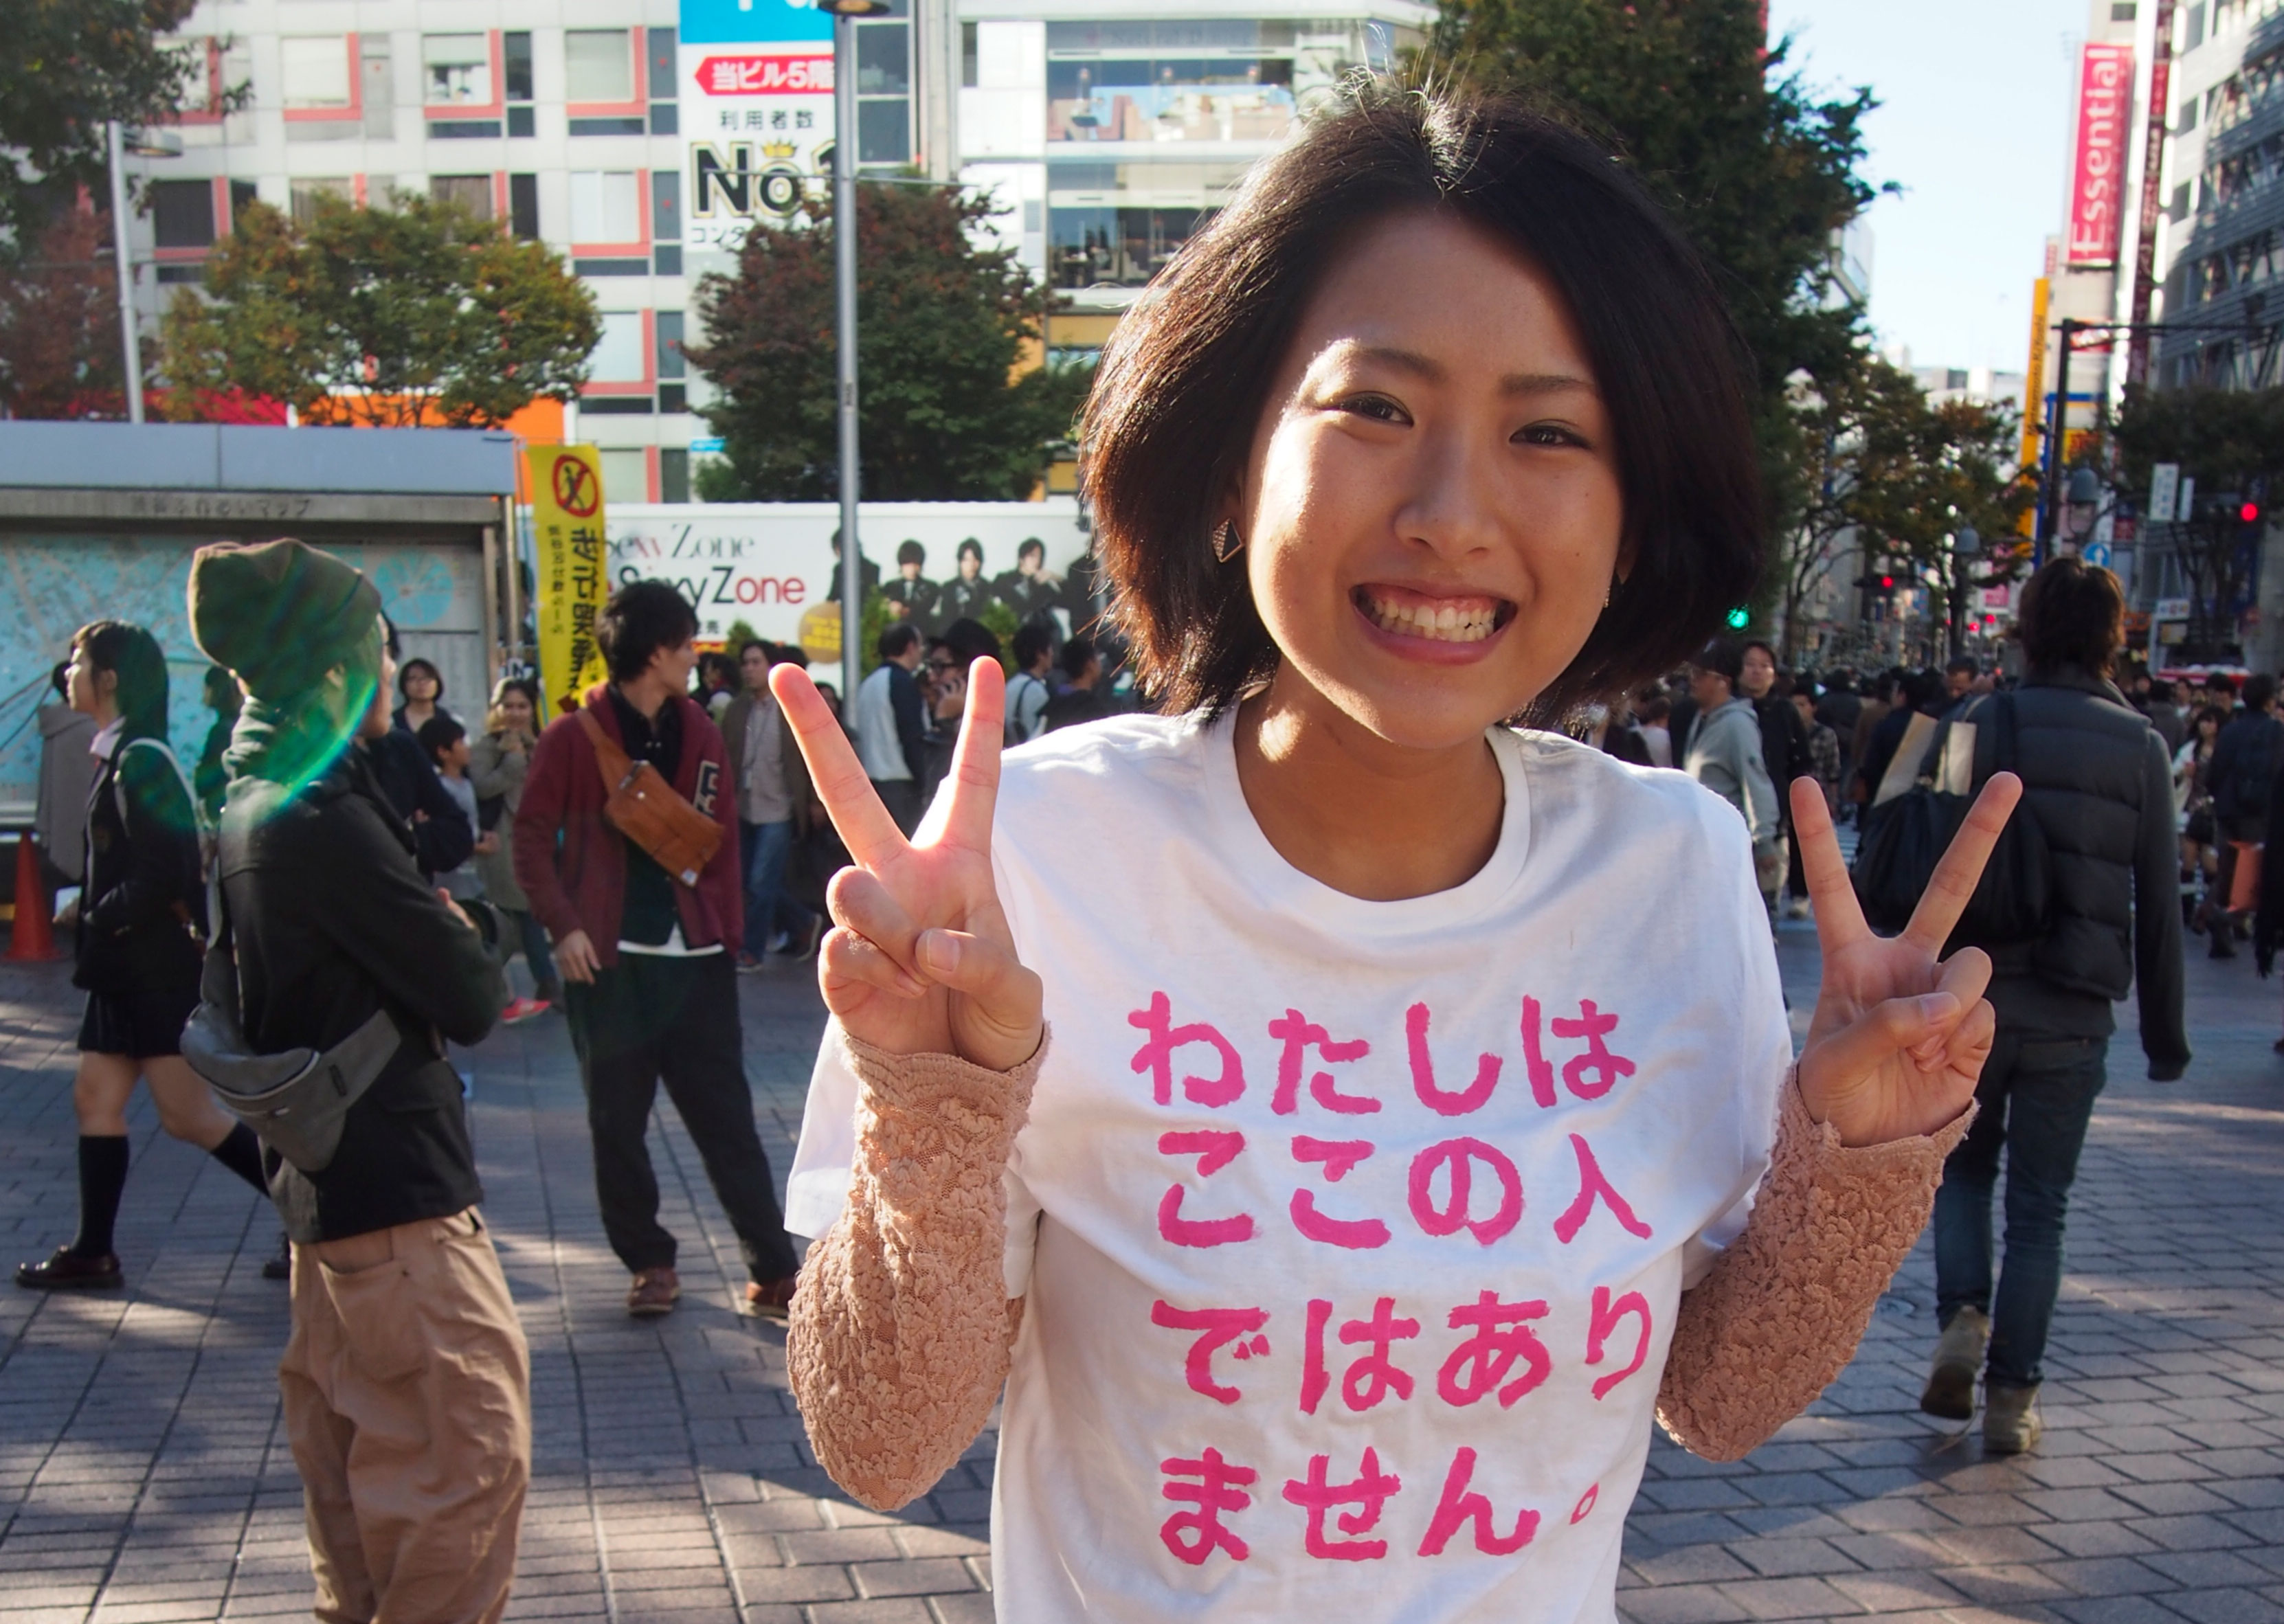 The ‘I am not from here’ T-shirt licence the wearer to momentarily, just for a day, or for as long as he would like, embrace the stranger within, and to broadcast the alienation of the traveler as a liberating message. 「わたしはここの人ではありません。」と書かれたこのTシャツを身につければ、その間は、1日だけ、あるいはお好きなだけいつまででも、自分の中の外国人を受け止めて、旅行者の抱える疎外感を、解放へのメッセージとして広めることができる。